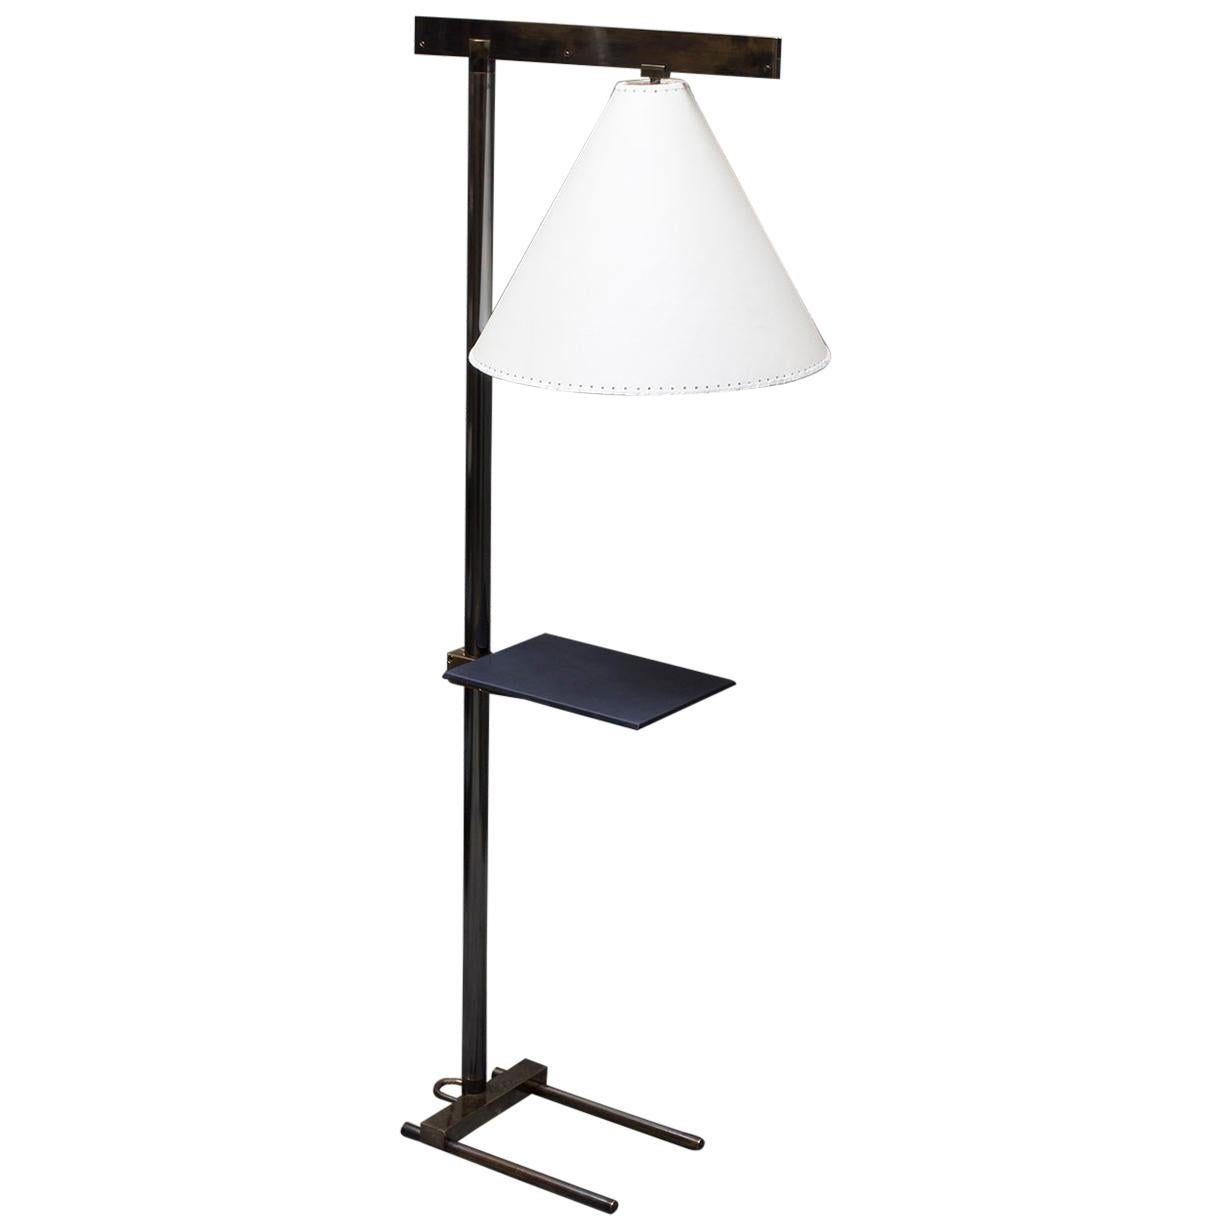 Series02 Floor Lamp, Smoke Patinated Brass, Goatskin Shade, Leather Wrapped Tray